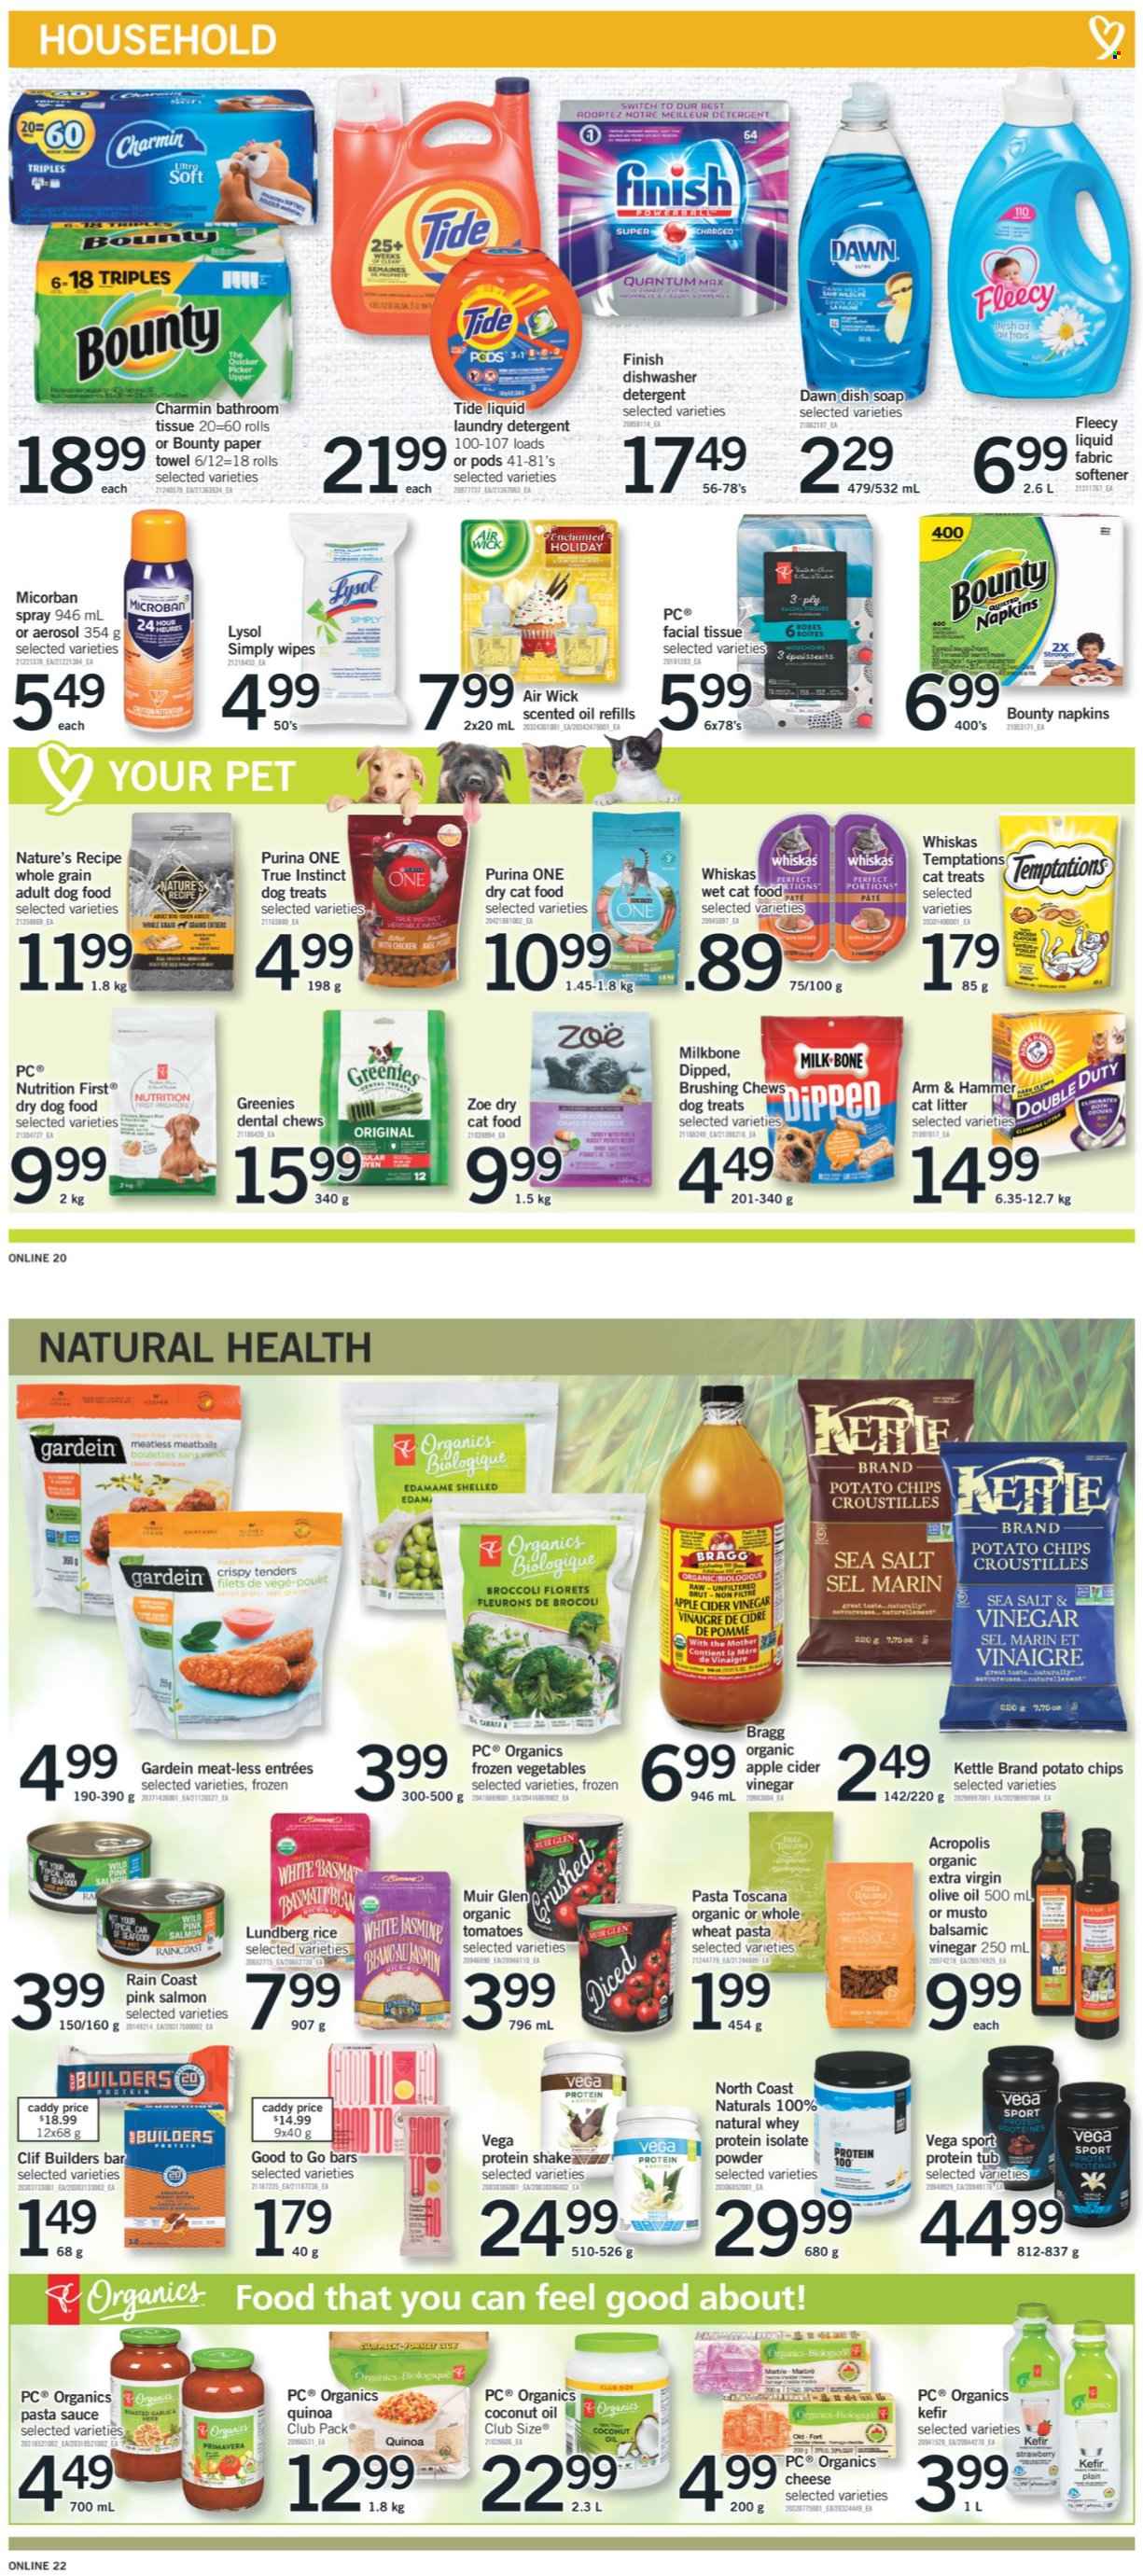 thumbnail - Fortinos Flyer - October 28, 2021 - November 03, 2021 - Sales products - broccoli, pasta sauce, meatballs, edam cheese, cheese, milk, kefir, frozen vegetables, Bounty, chewing gum, potato chips, apple cider vinegar, coconut oil, extra virgin olive oil, olive oil, oil, switch, wipes, napkins, tissues, paper towels, Charmin, Lysol, Tide, fabric softener, laundry detergent, soap, Zoe, Brut, Air Wick, scented oil, cat litter, Greenies, dental chews, animal food, cat food, dog food, Purina, dry dog food, dry cat food, whey protein, detergent, quinoa, Whiskas. Page 11.